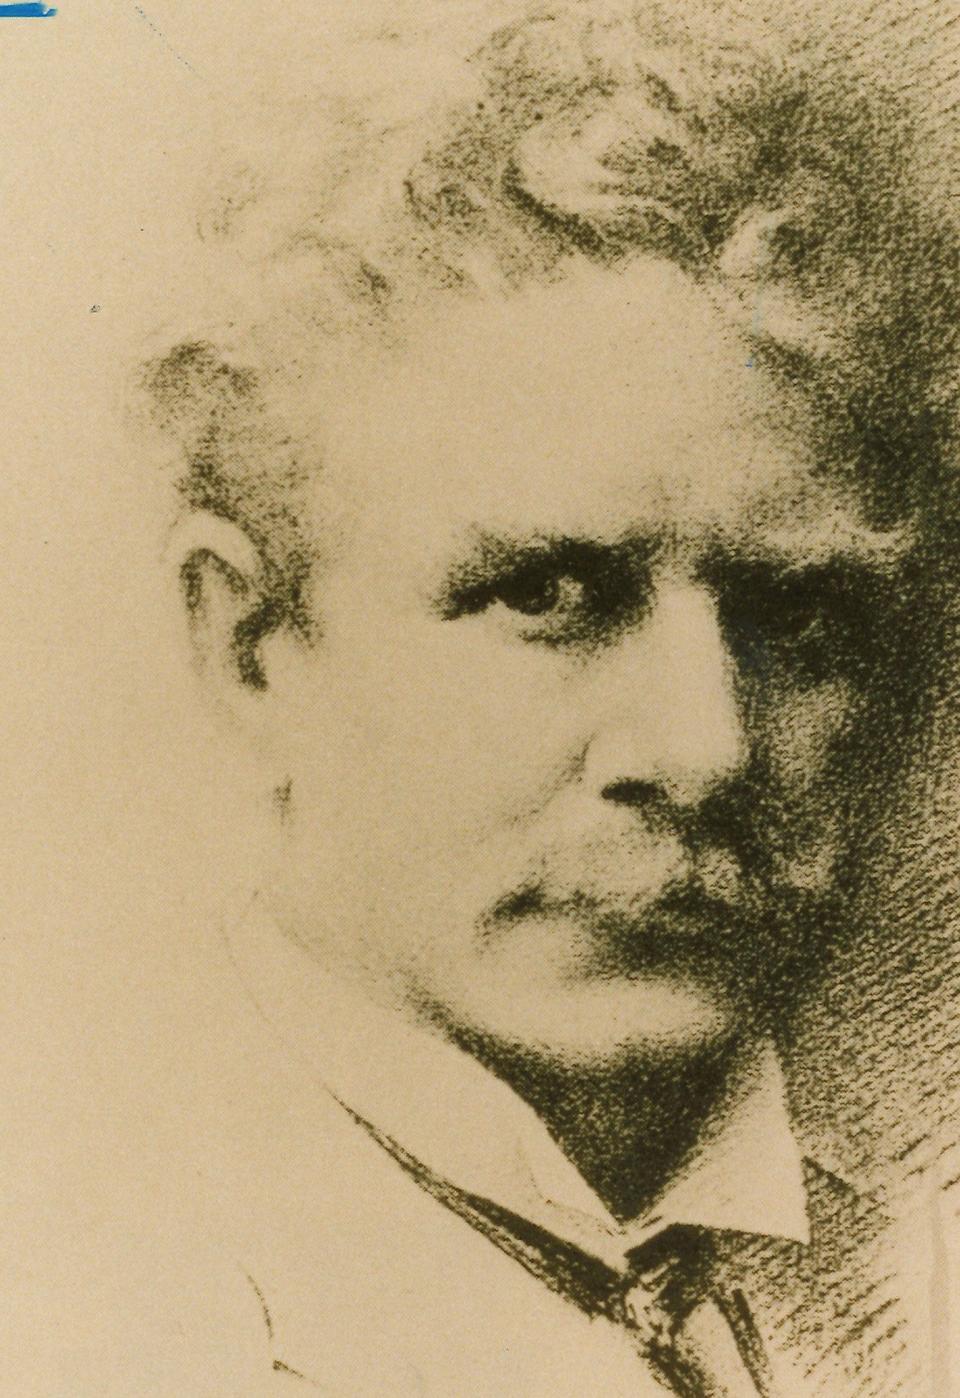 Ambrose Bierce, a Civil War veteran and author of "An Occurrence at Owl Creek Bridge" spent his adolescence in Indiana, disappeared in Mexico in December 1913, and a search was officially launched Sept. 19, 1914.